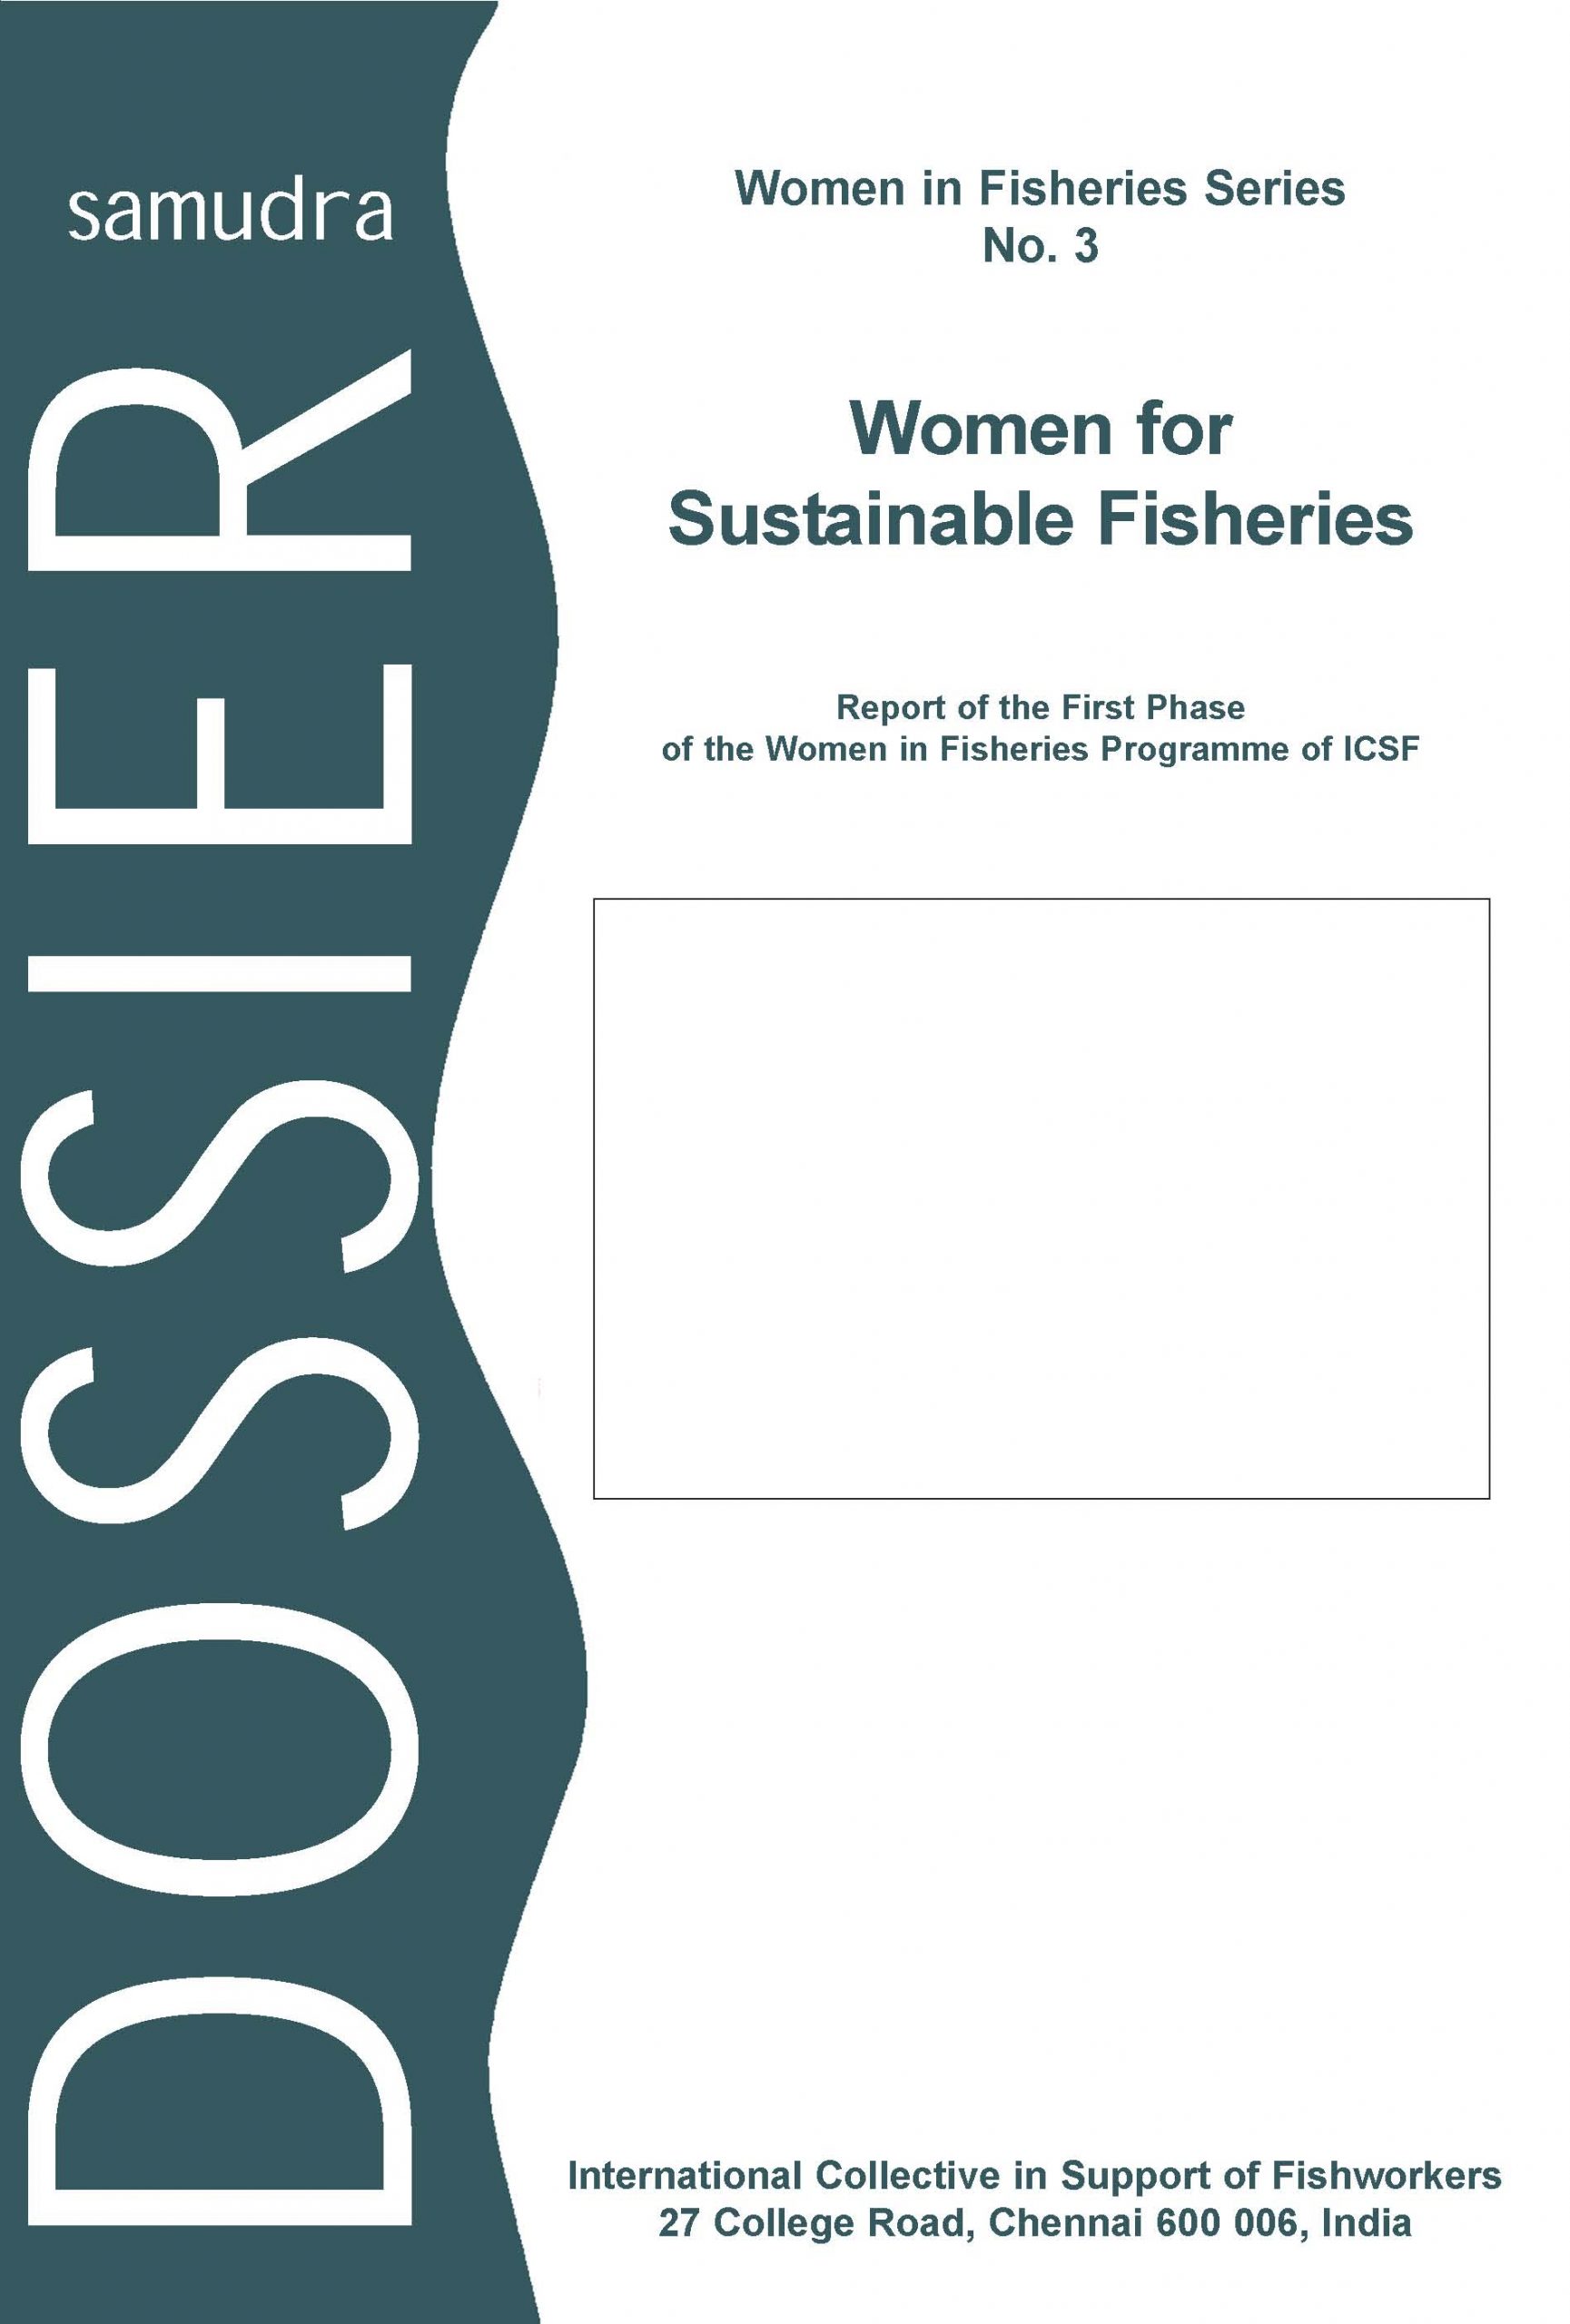 Women for Sustainable Fisheries: Report of the First Phase of the Women in Fisheries Programme of ICSF – Women in Fisheries No. 3